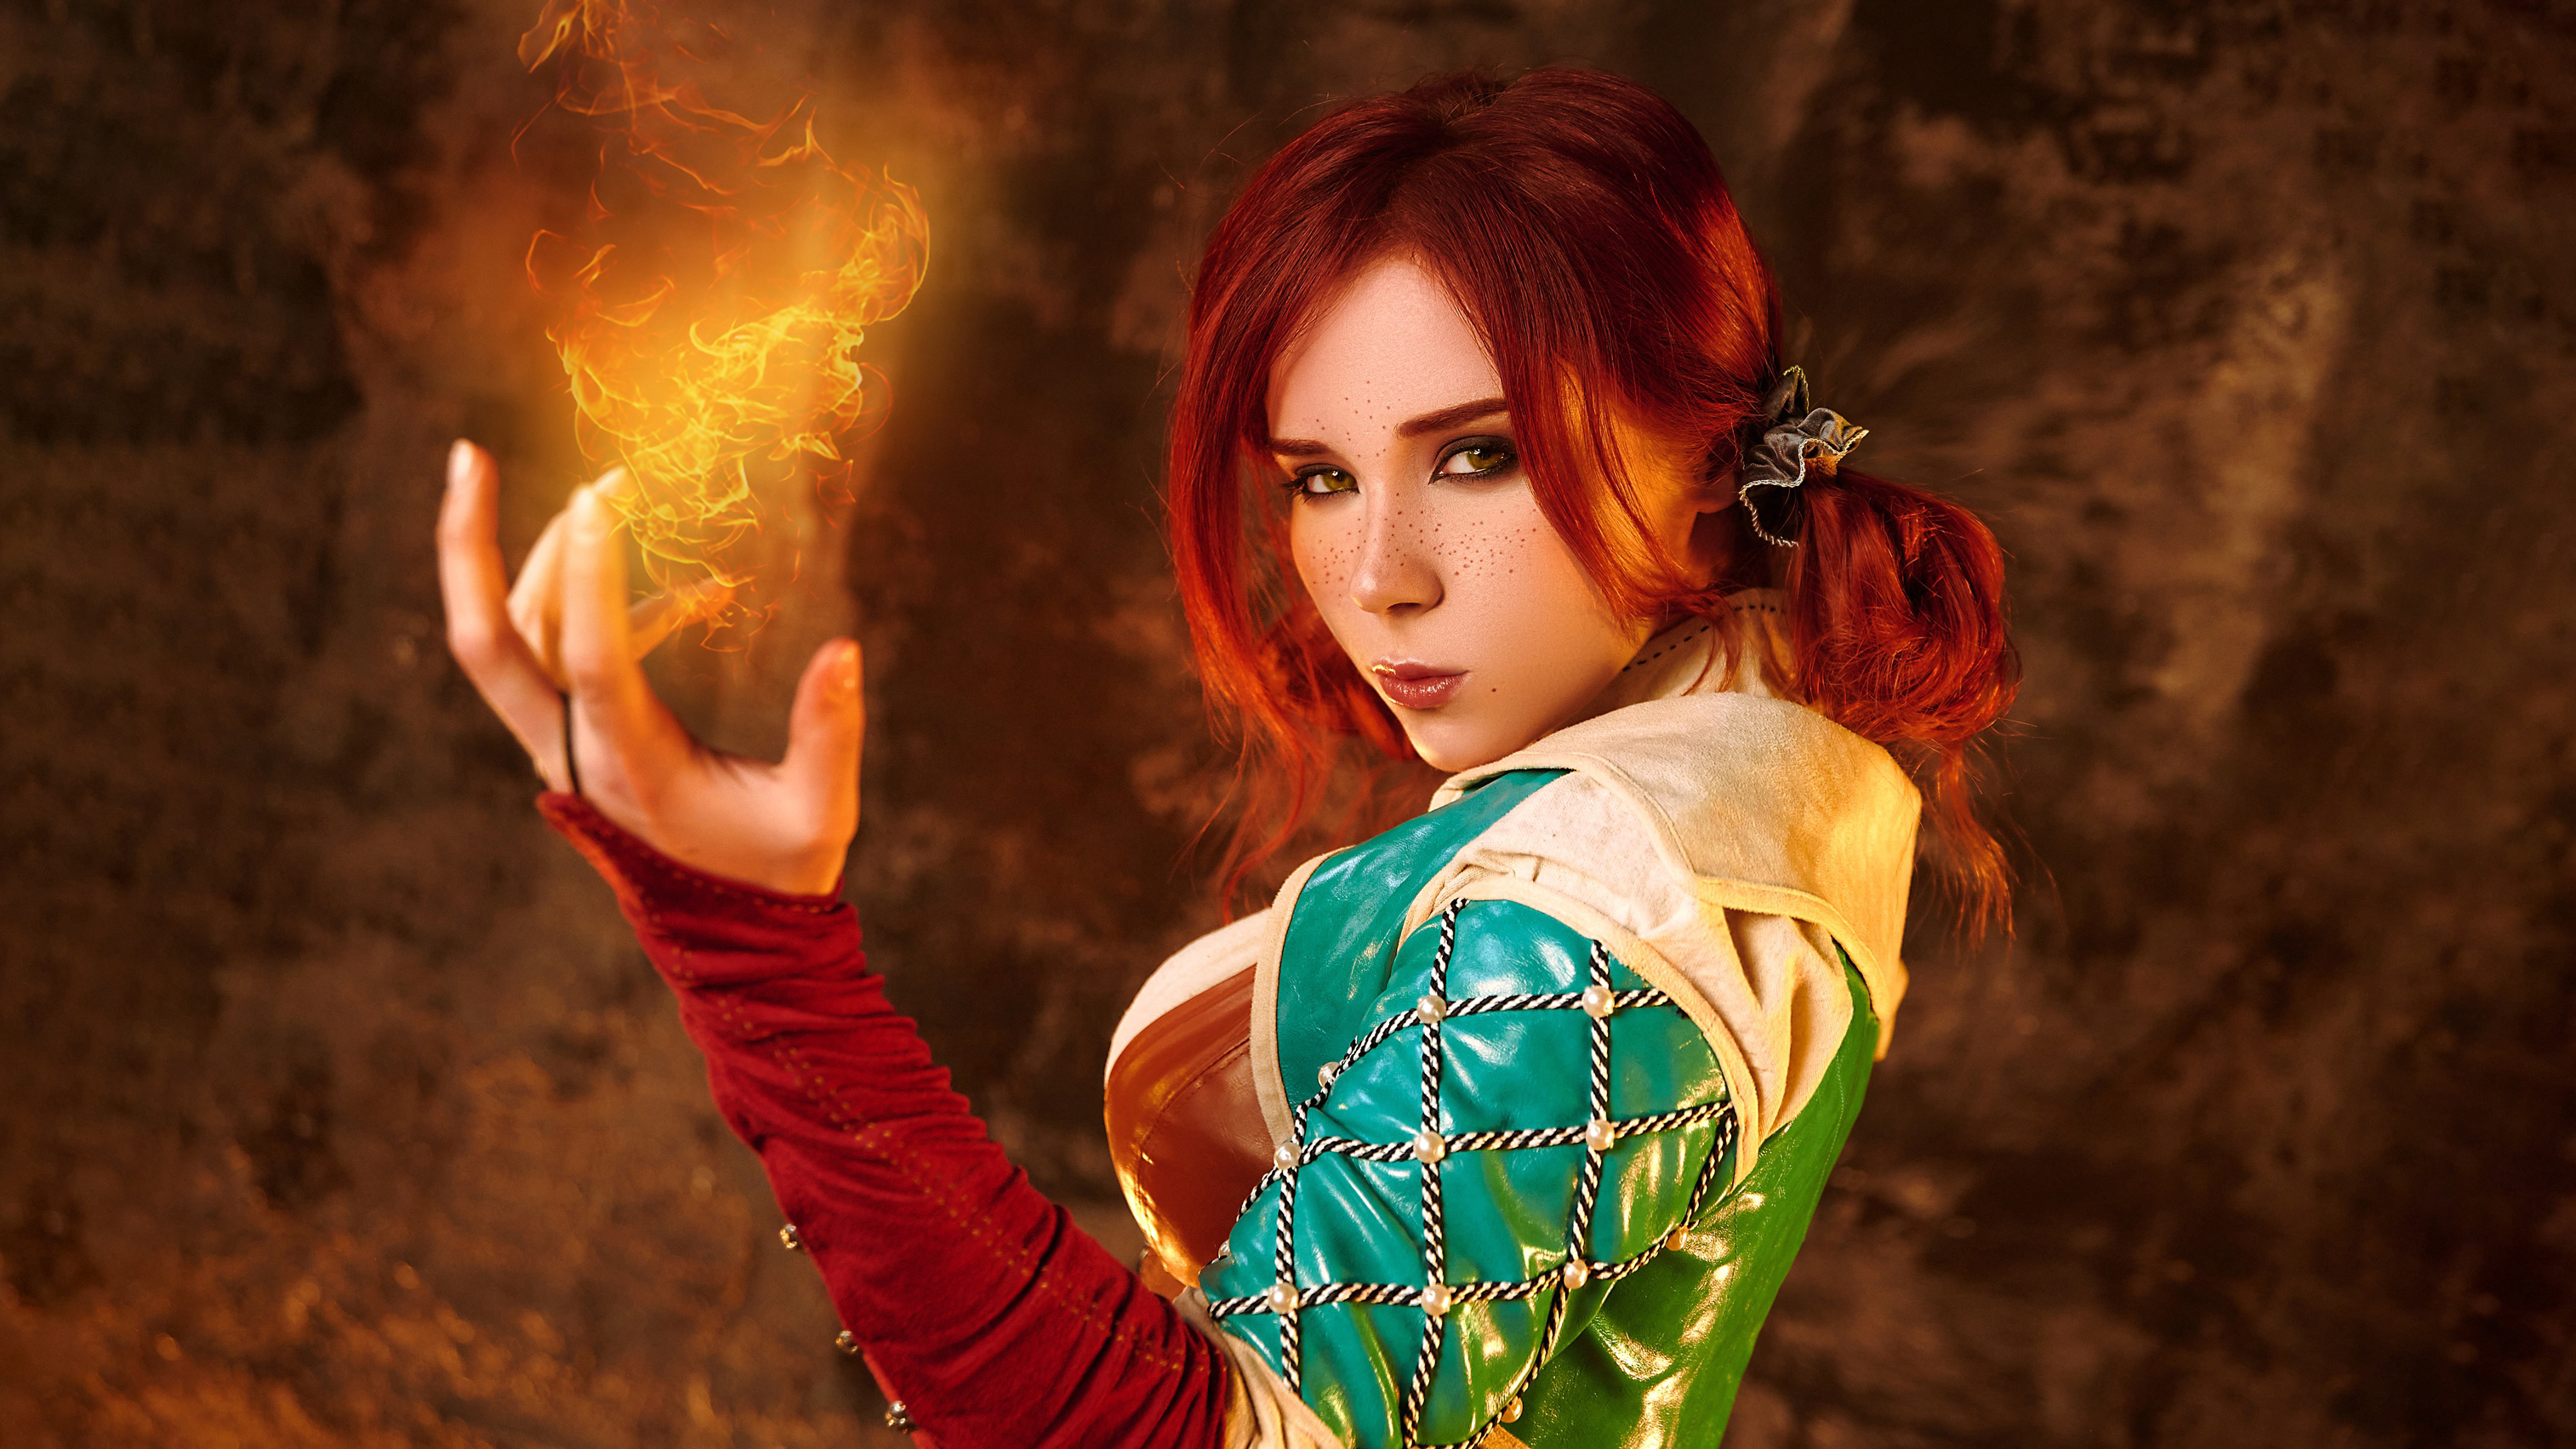 People 3028x1703 Sweetie_Fox cosplay Triss Merigold The Witcher The Witcher 3: Wild Hunt redhead women model